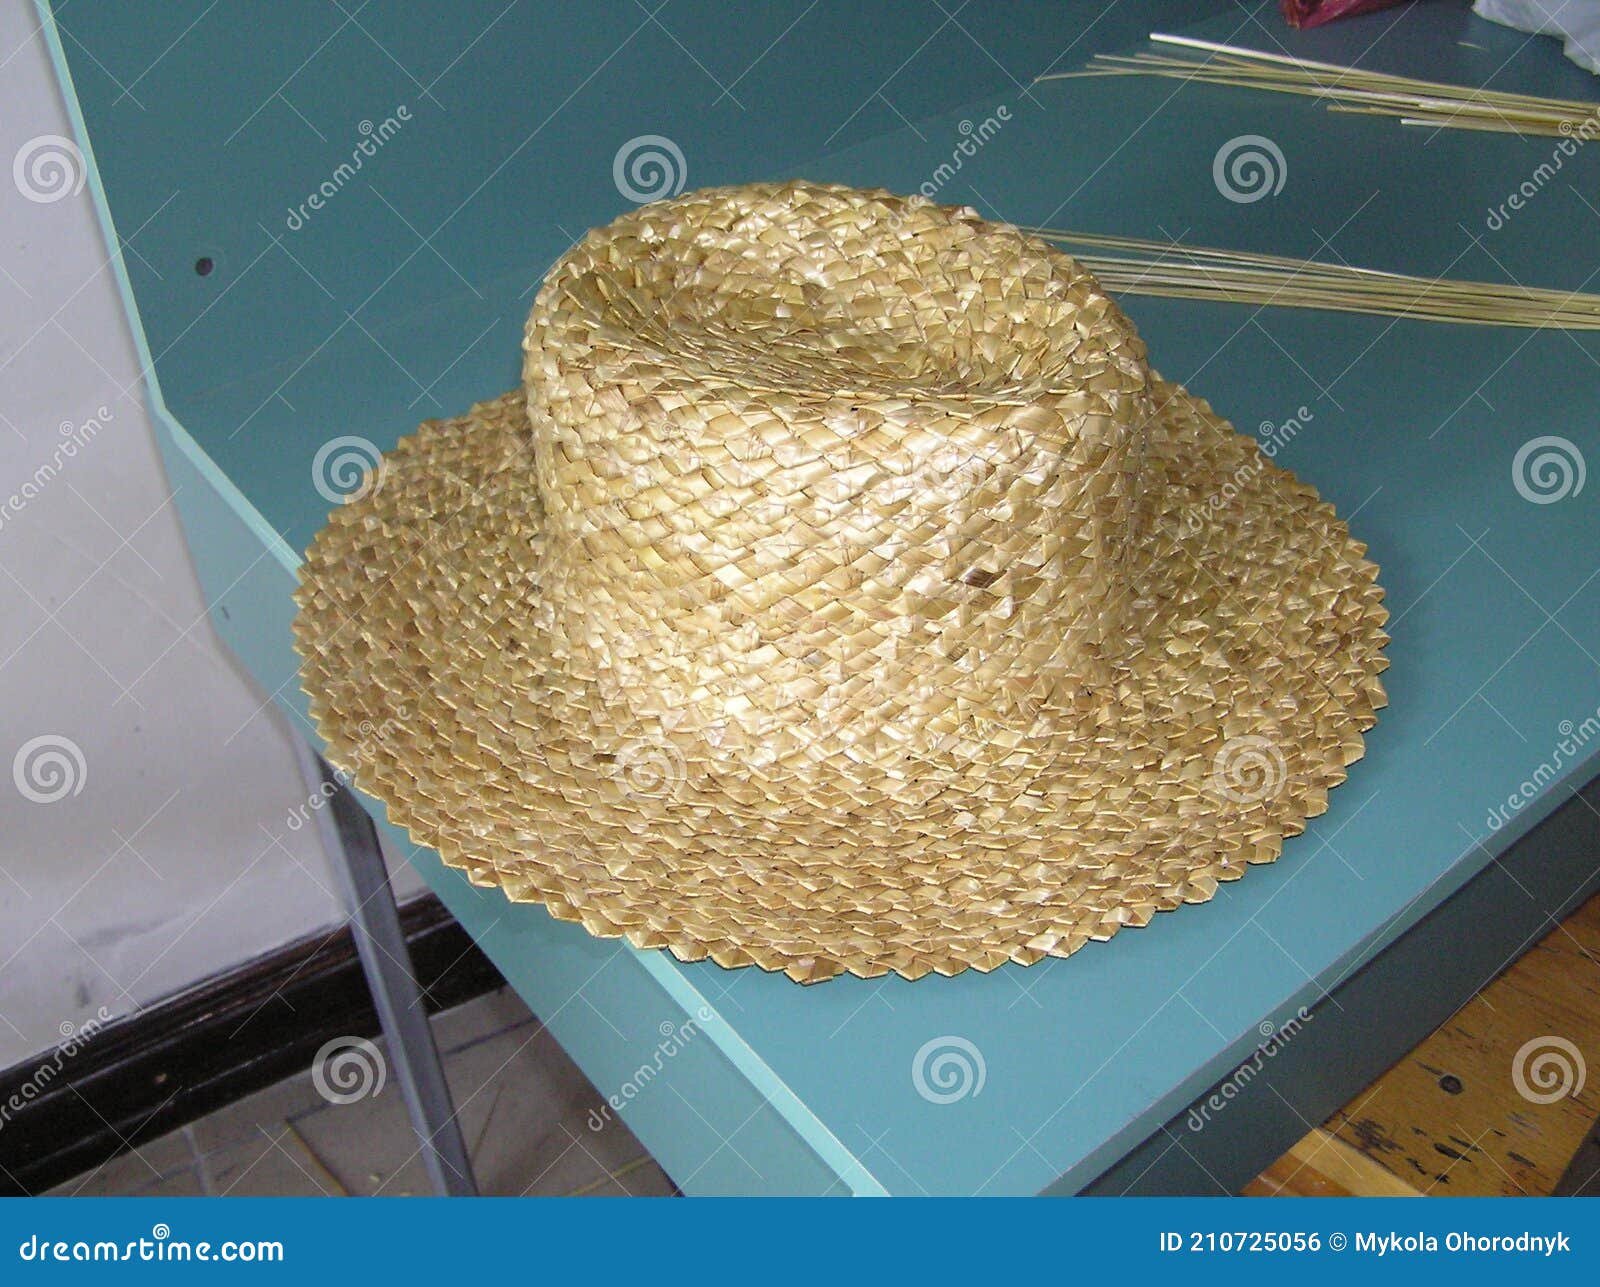 Traditional Handmade Straw Hats Stock Photo - Image of brown, close ...